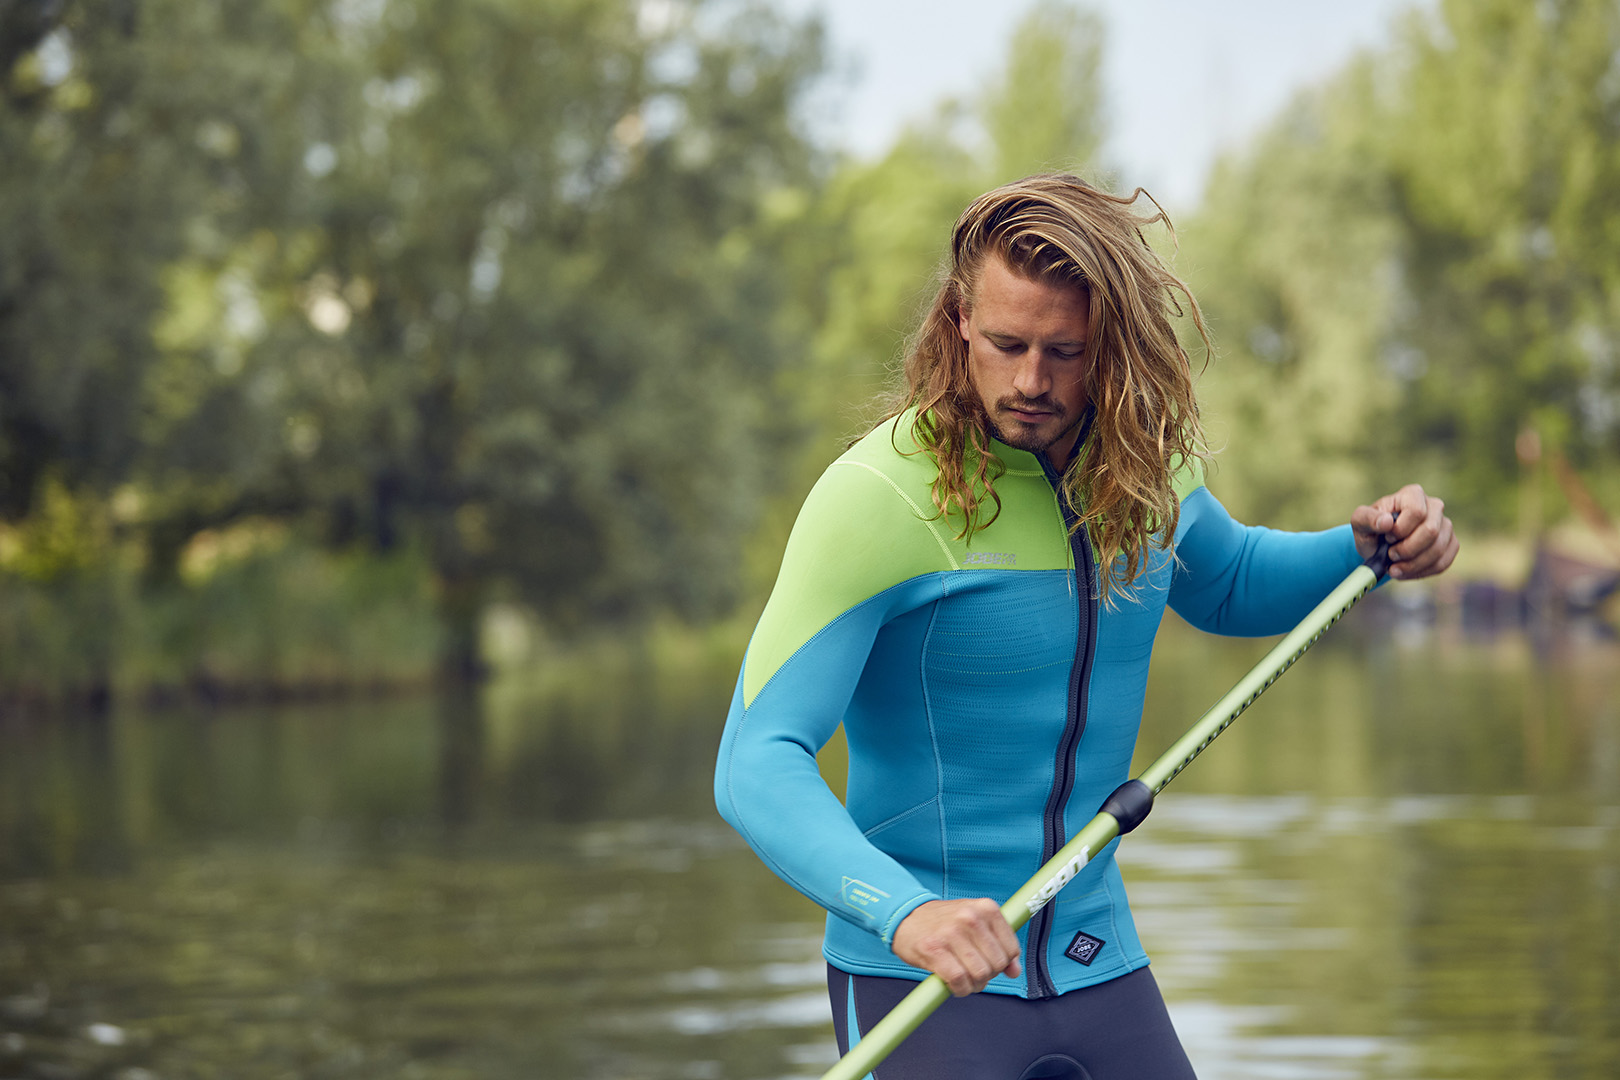 Start your paddling the right way with this sharp wetsuit for men